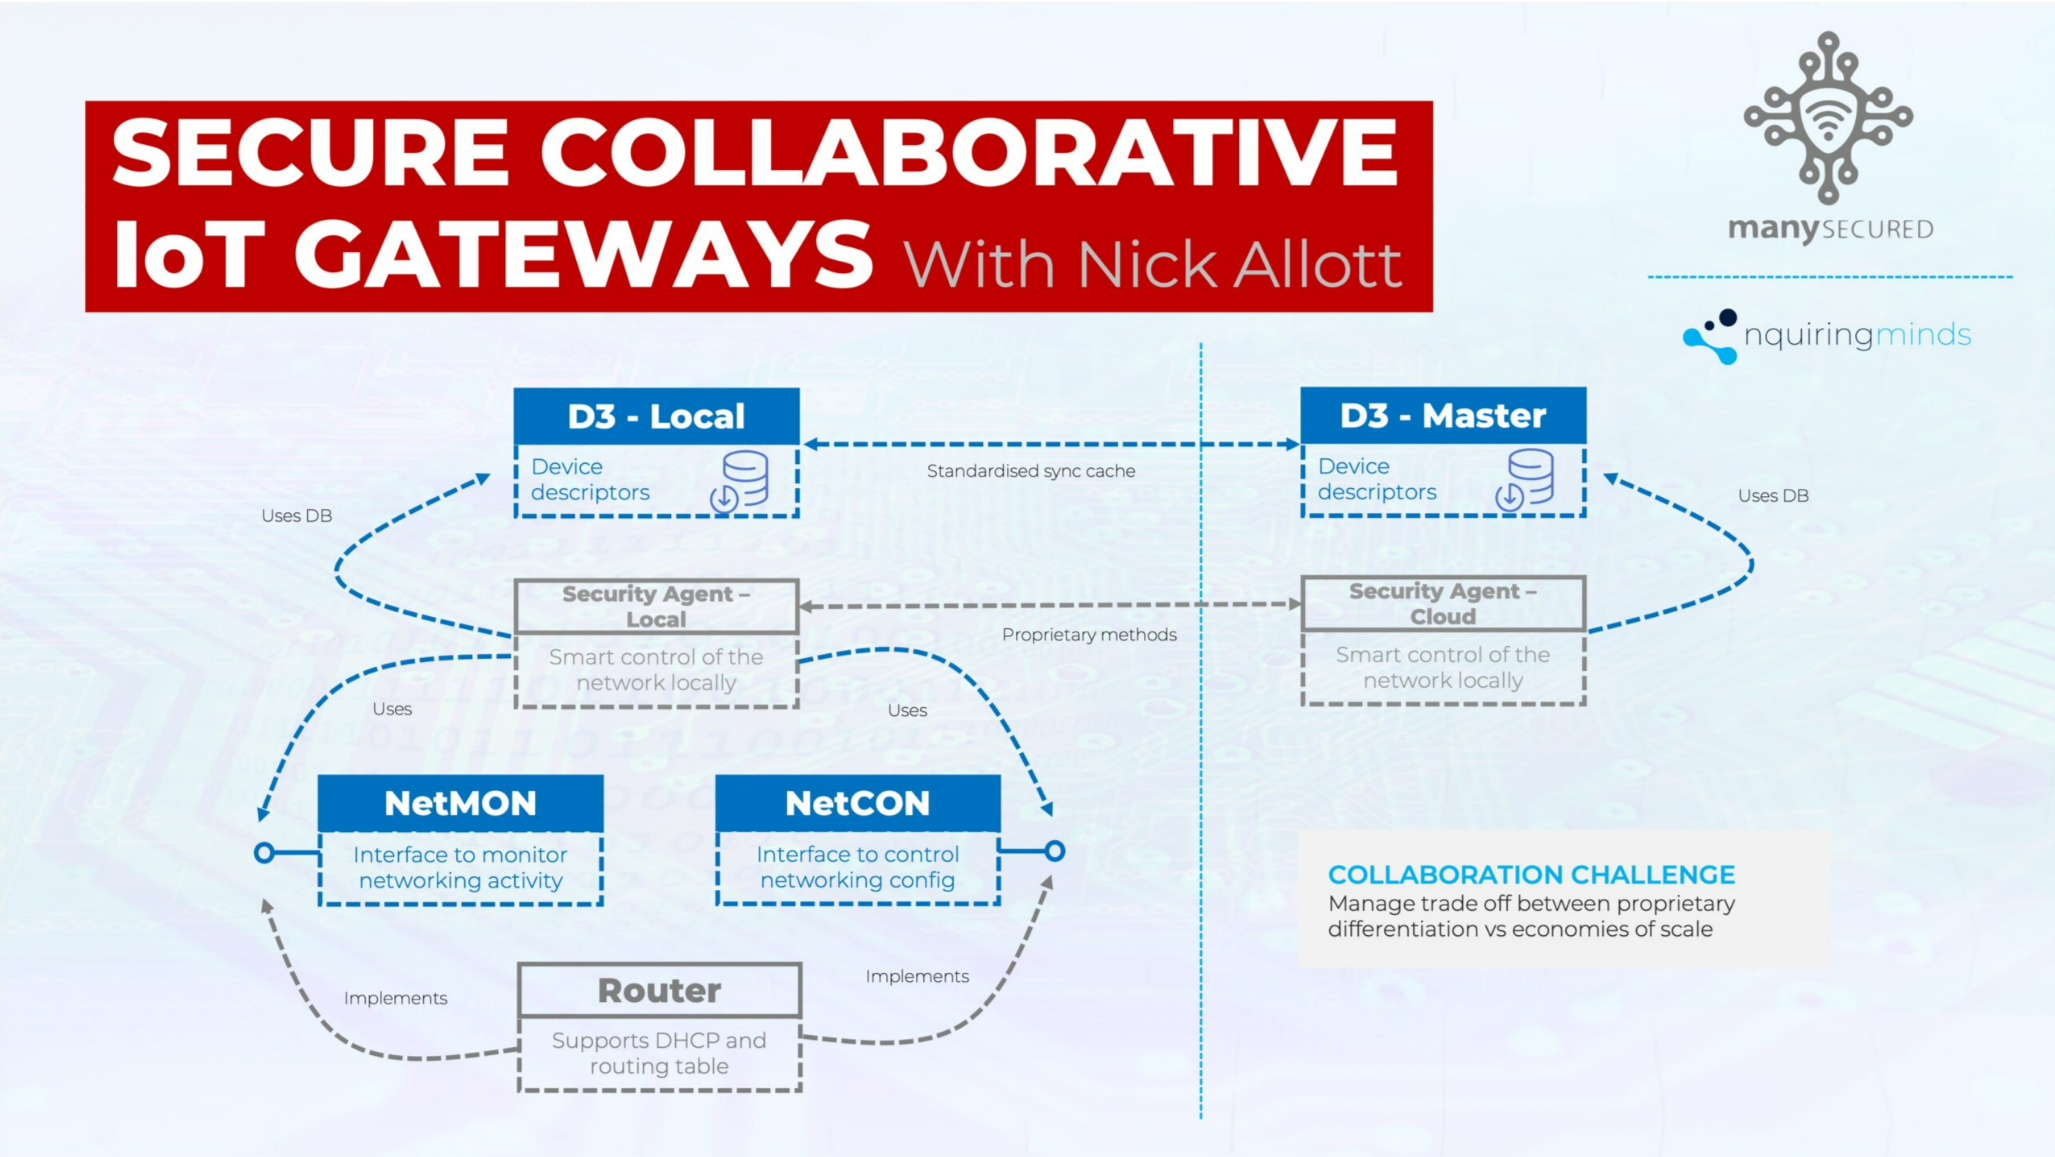 Secure Collaborative IoT Gateways with Nick Allott